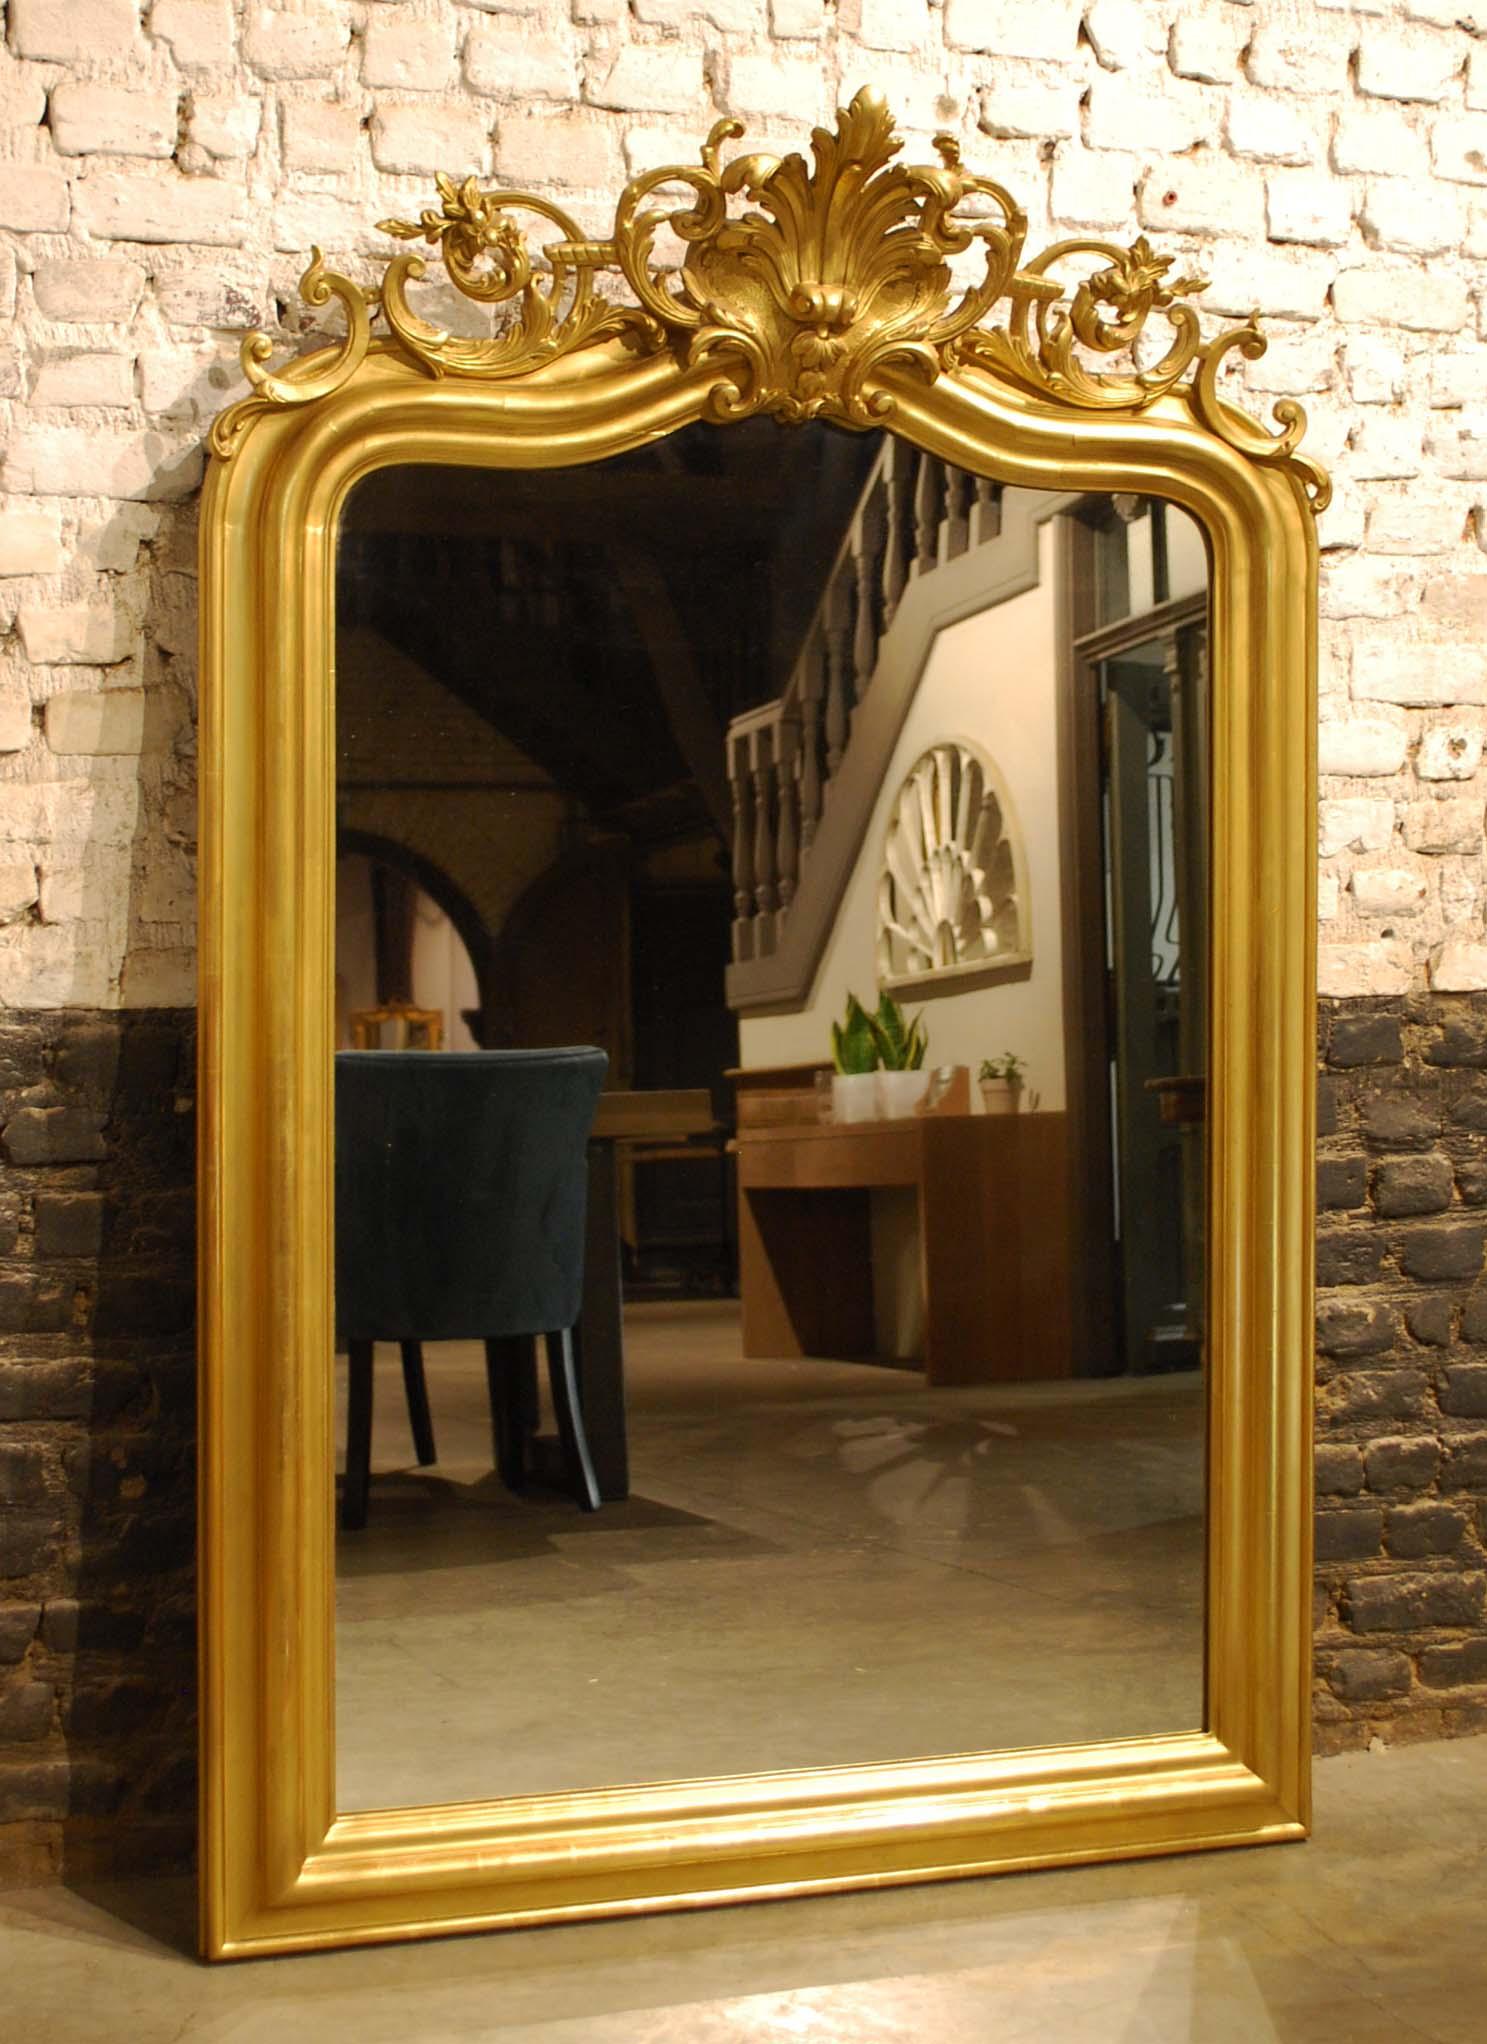 This beautiful antique Louis Philippe mirror was made in Southern France and dates circa 1850.
The frame is partly gold leaf gilt and partly gilded with gold paint. The sculpted cartouche or crest on top is centered upon two stylized acanthi